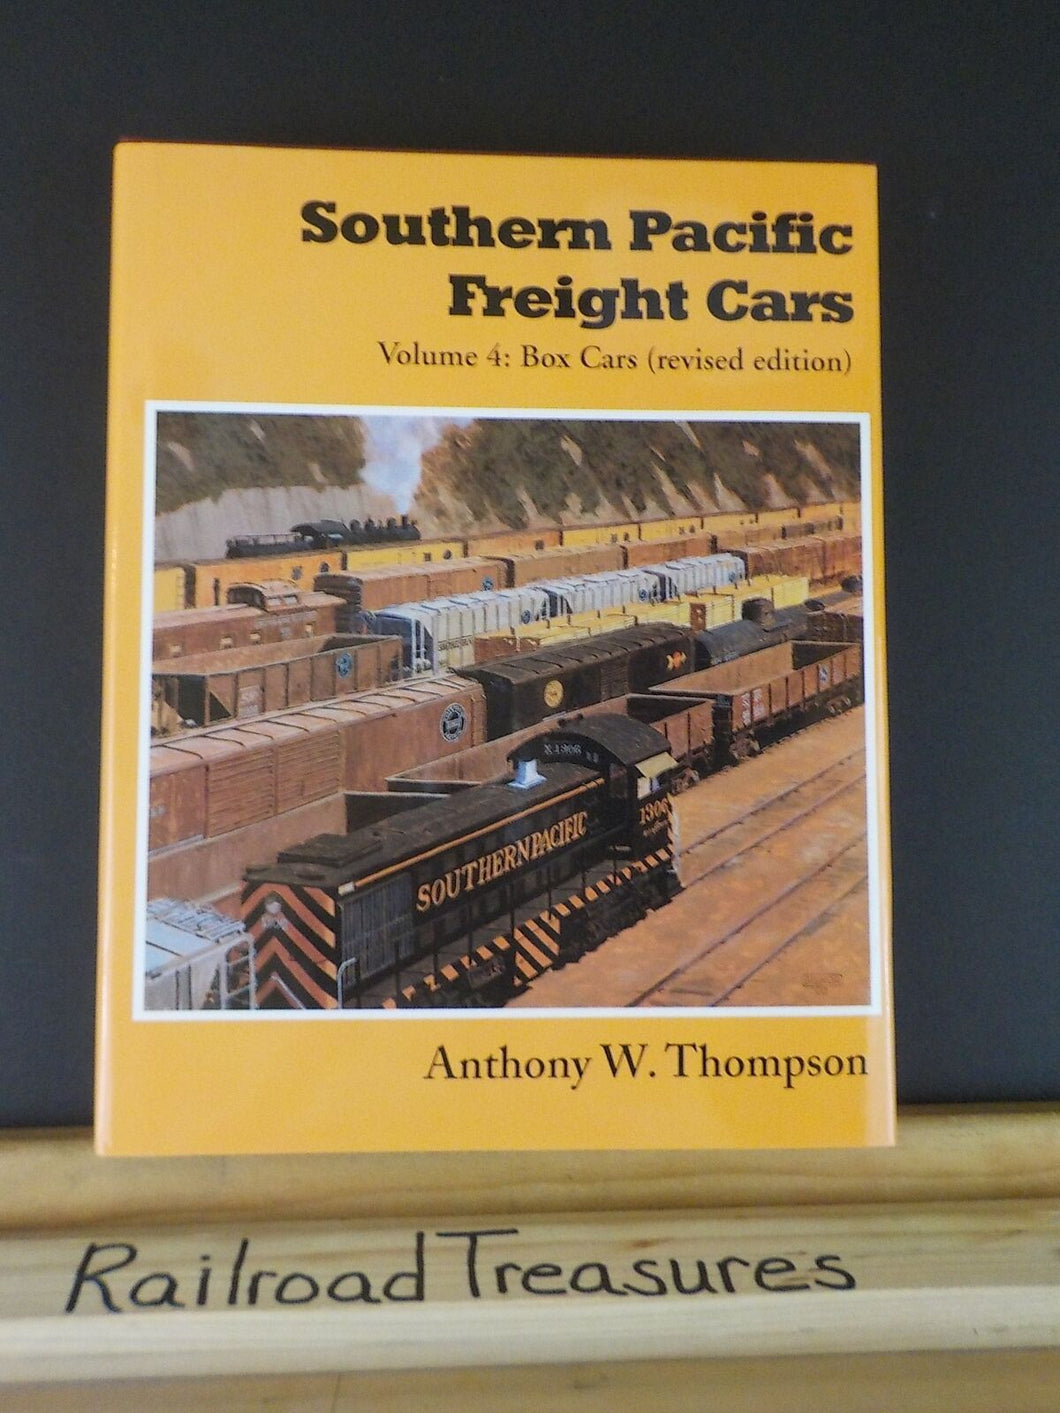 Southern Pacific Freight Cars Vol 4 Box Cars by Anthony Thompson Revised ed w/DJ